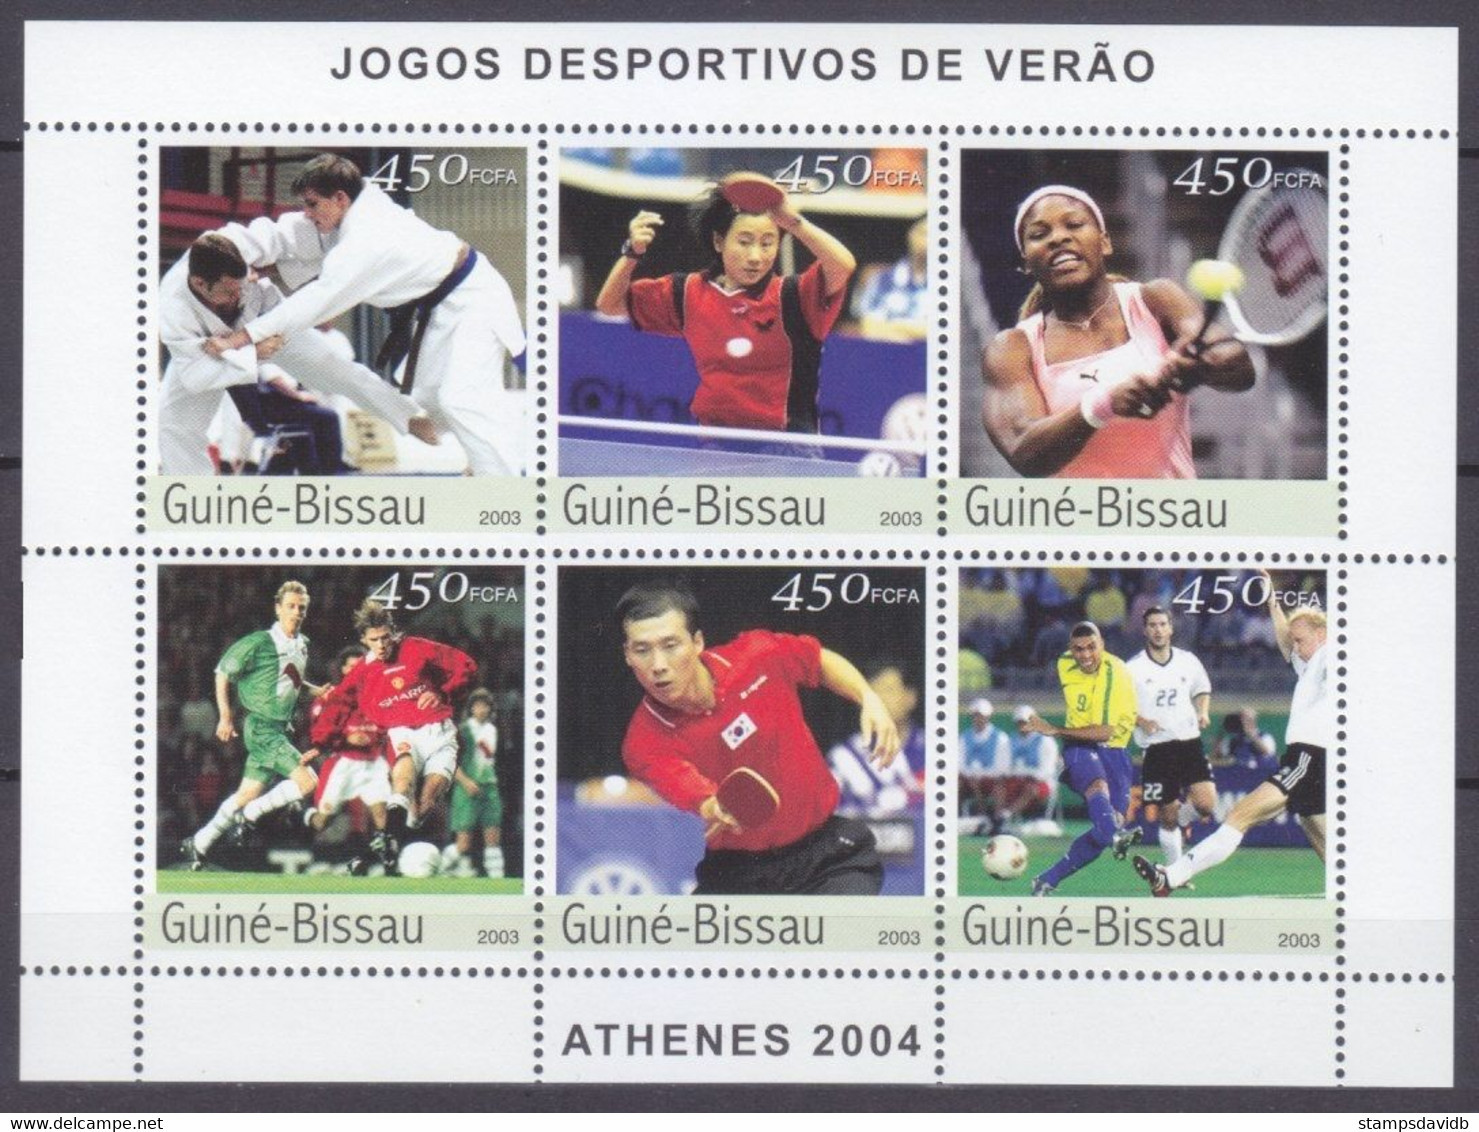 2003 Guinea-Bissau 2381-2386KL 2004 Olympic Games In Athens  11,00 € - Sommer 2004: Athen